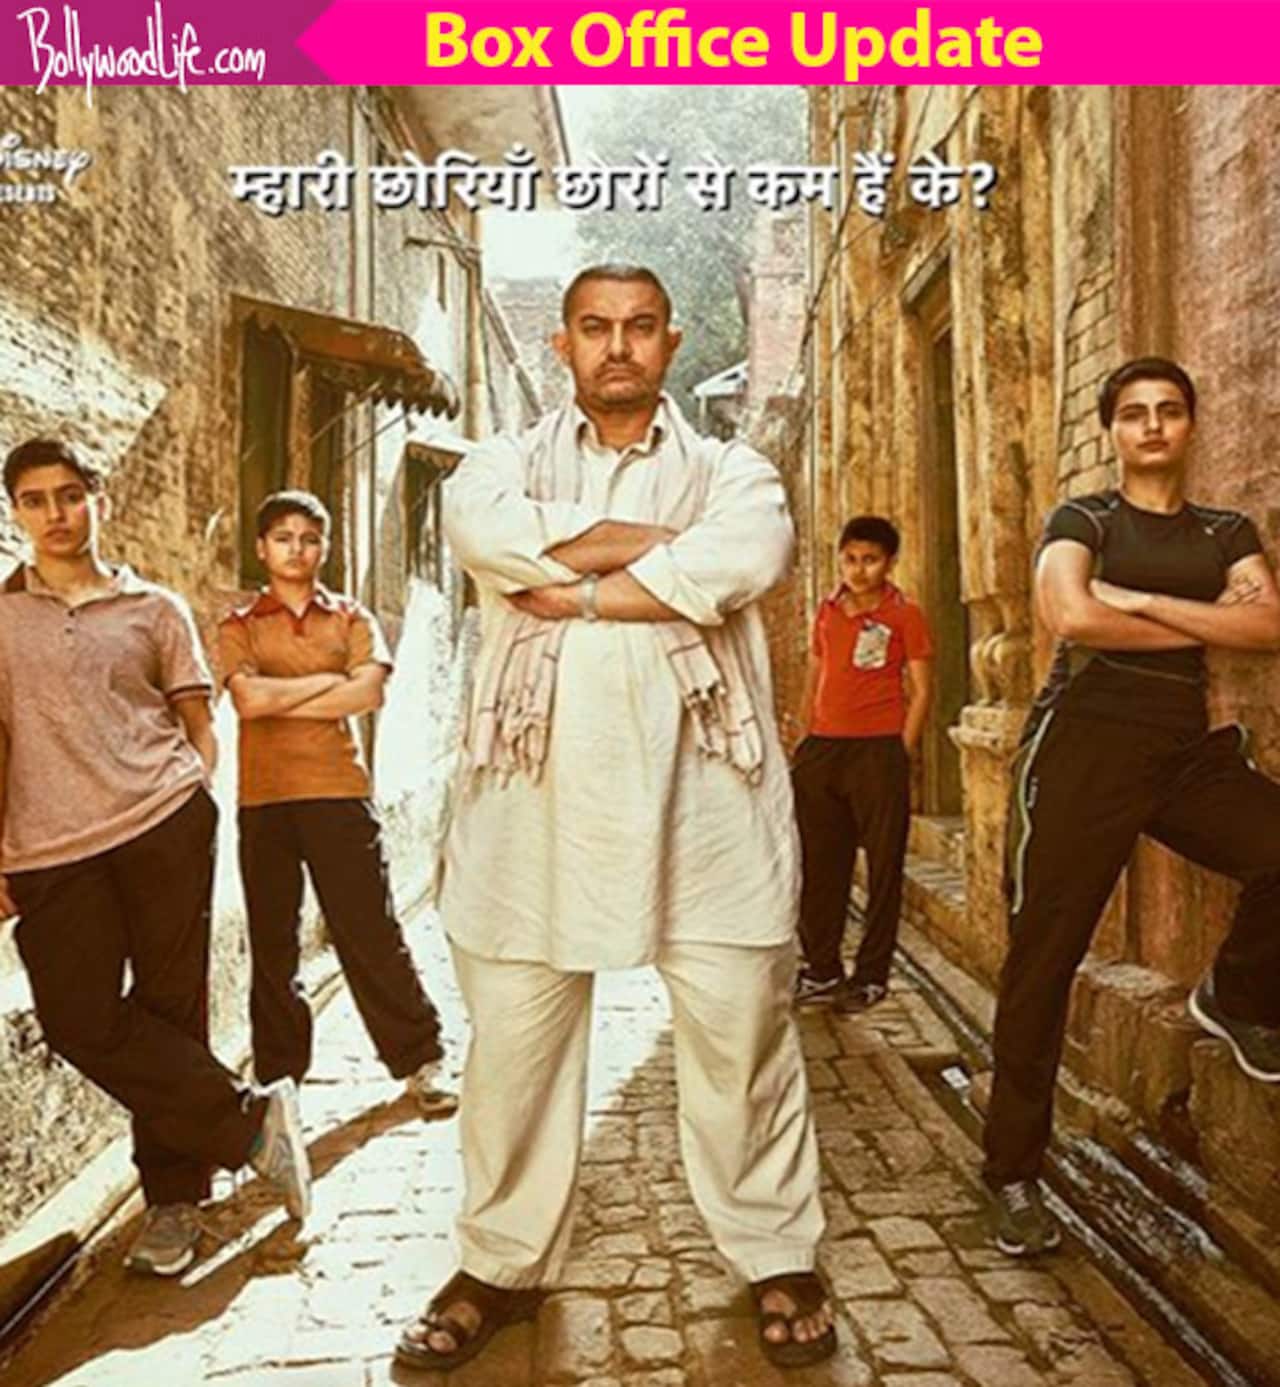 Dangal box office collection day 24: Aamir Khan's film inches closer to Rs 375 crore mark at the end of the fourth weekend